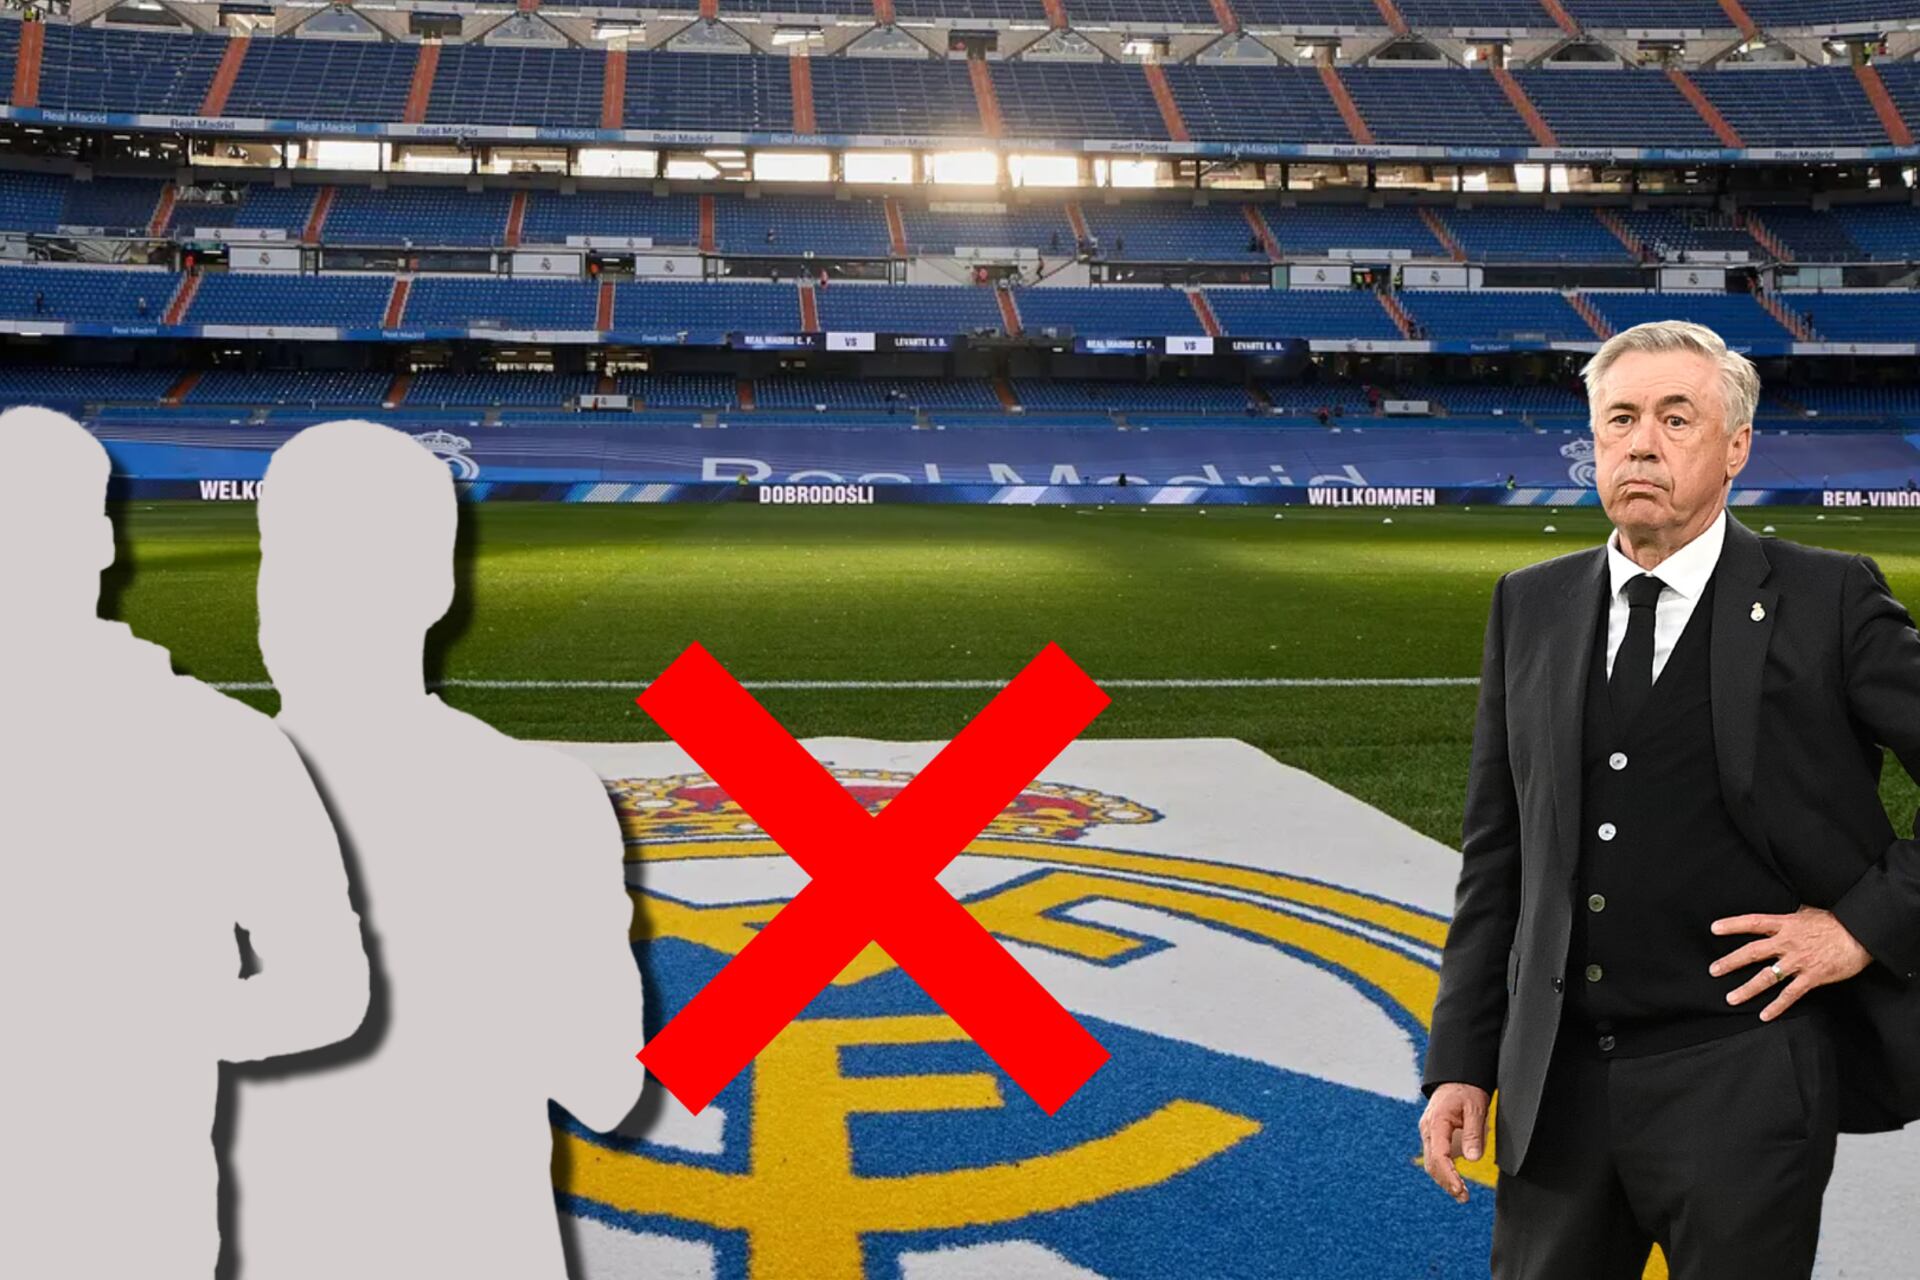 The two Real Madrid players that are frustrated with Carlo Ancelotti